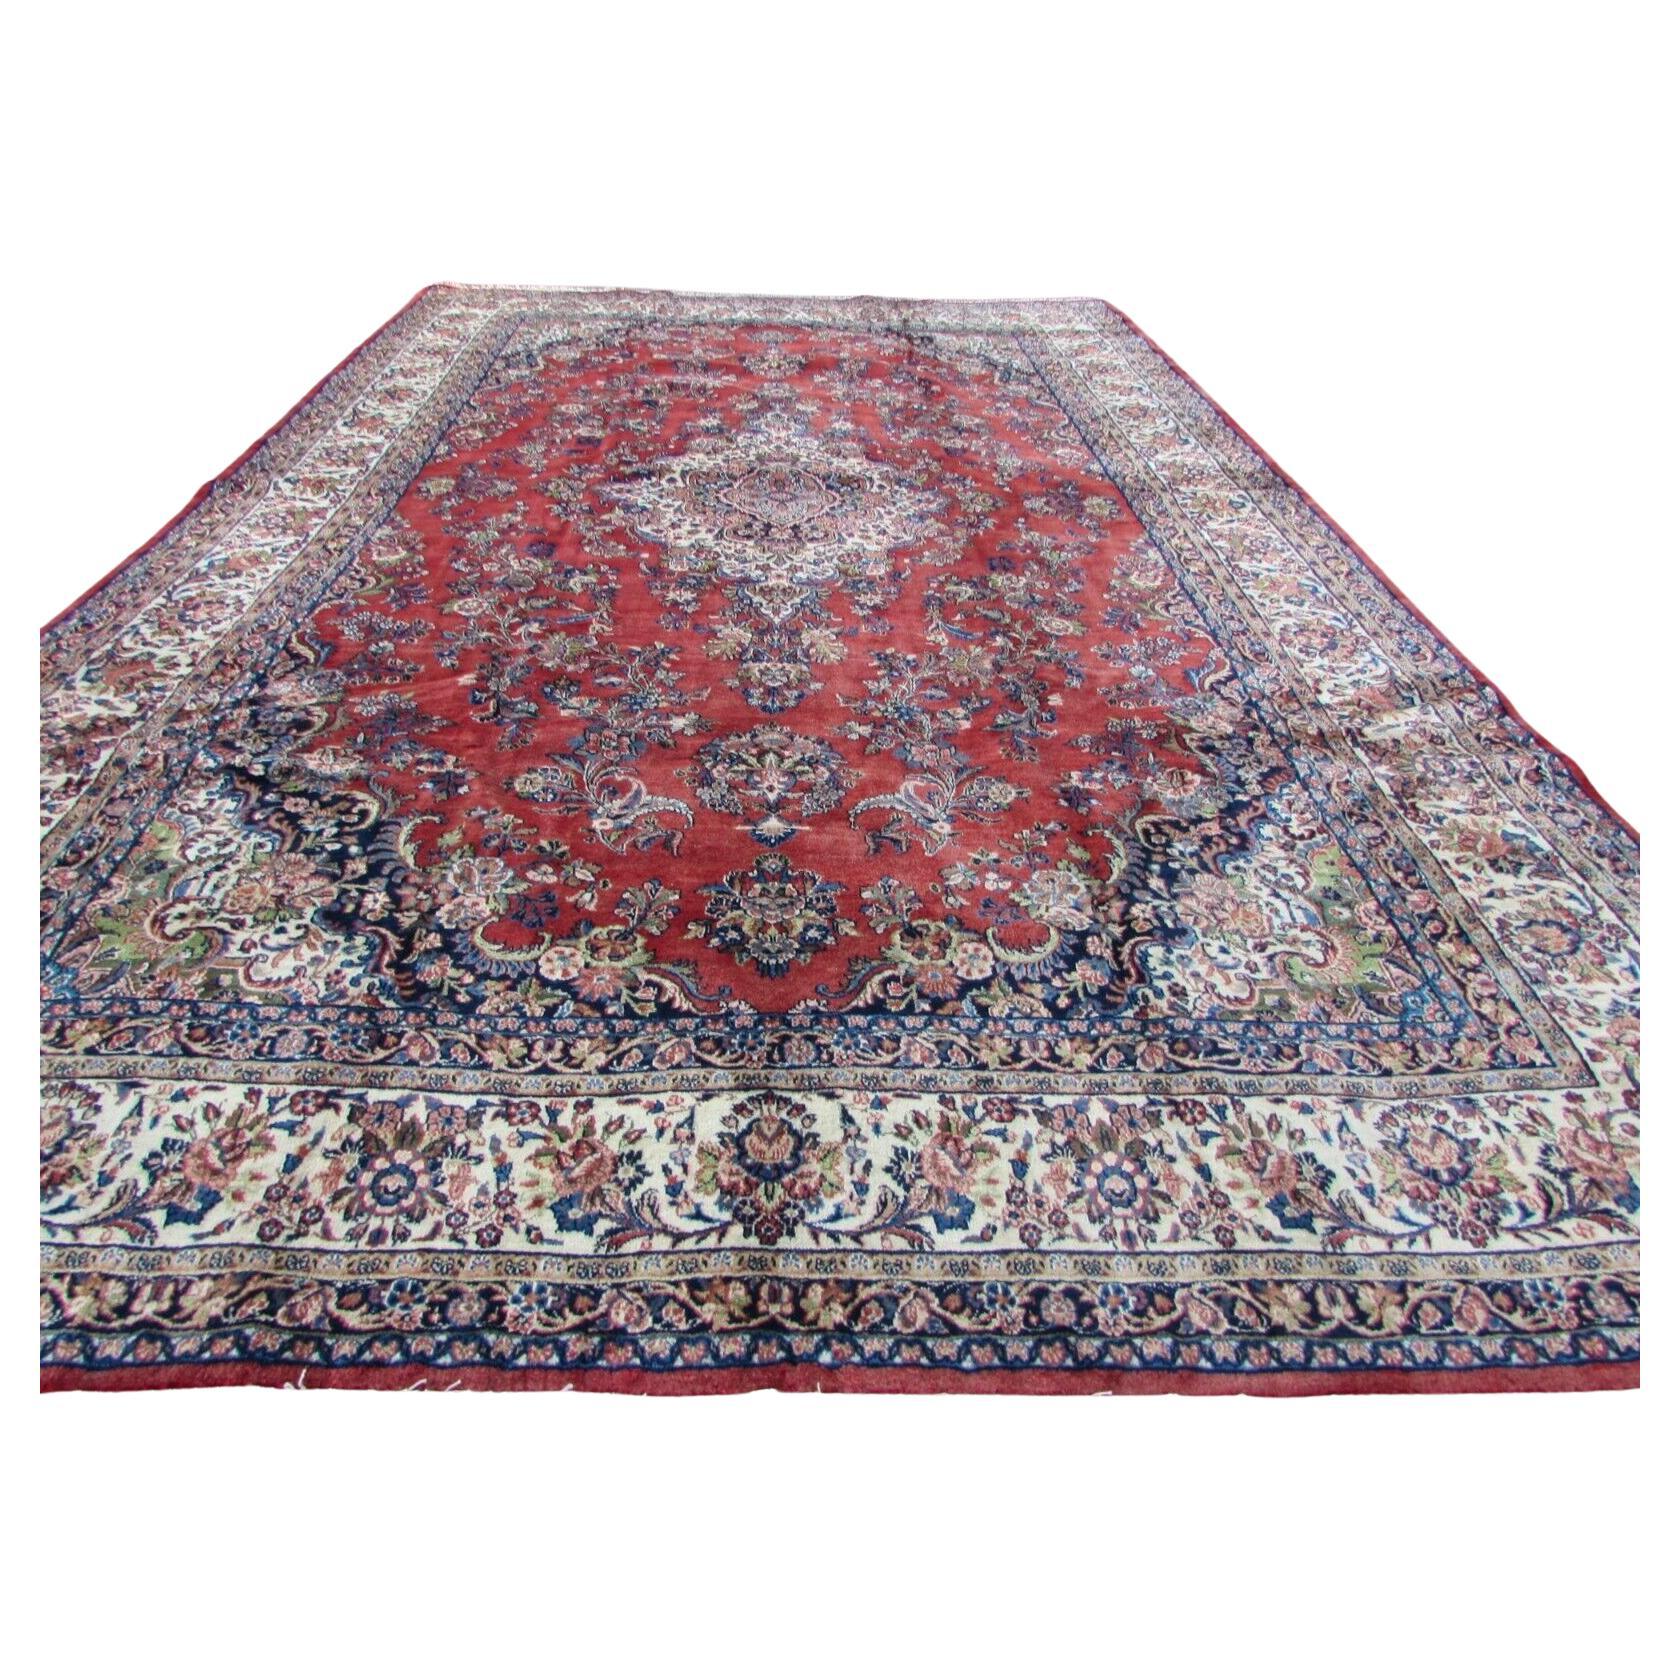 Handmade Vintage Persian Style Sarouk Oversize Rug 10.3' x 16.2', 1970s, 1Q58 For Sale